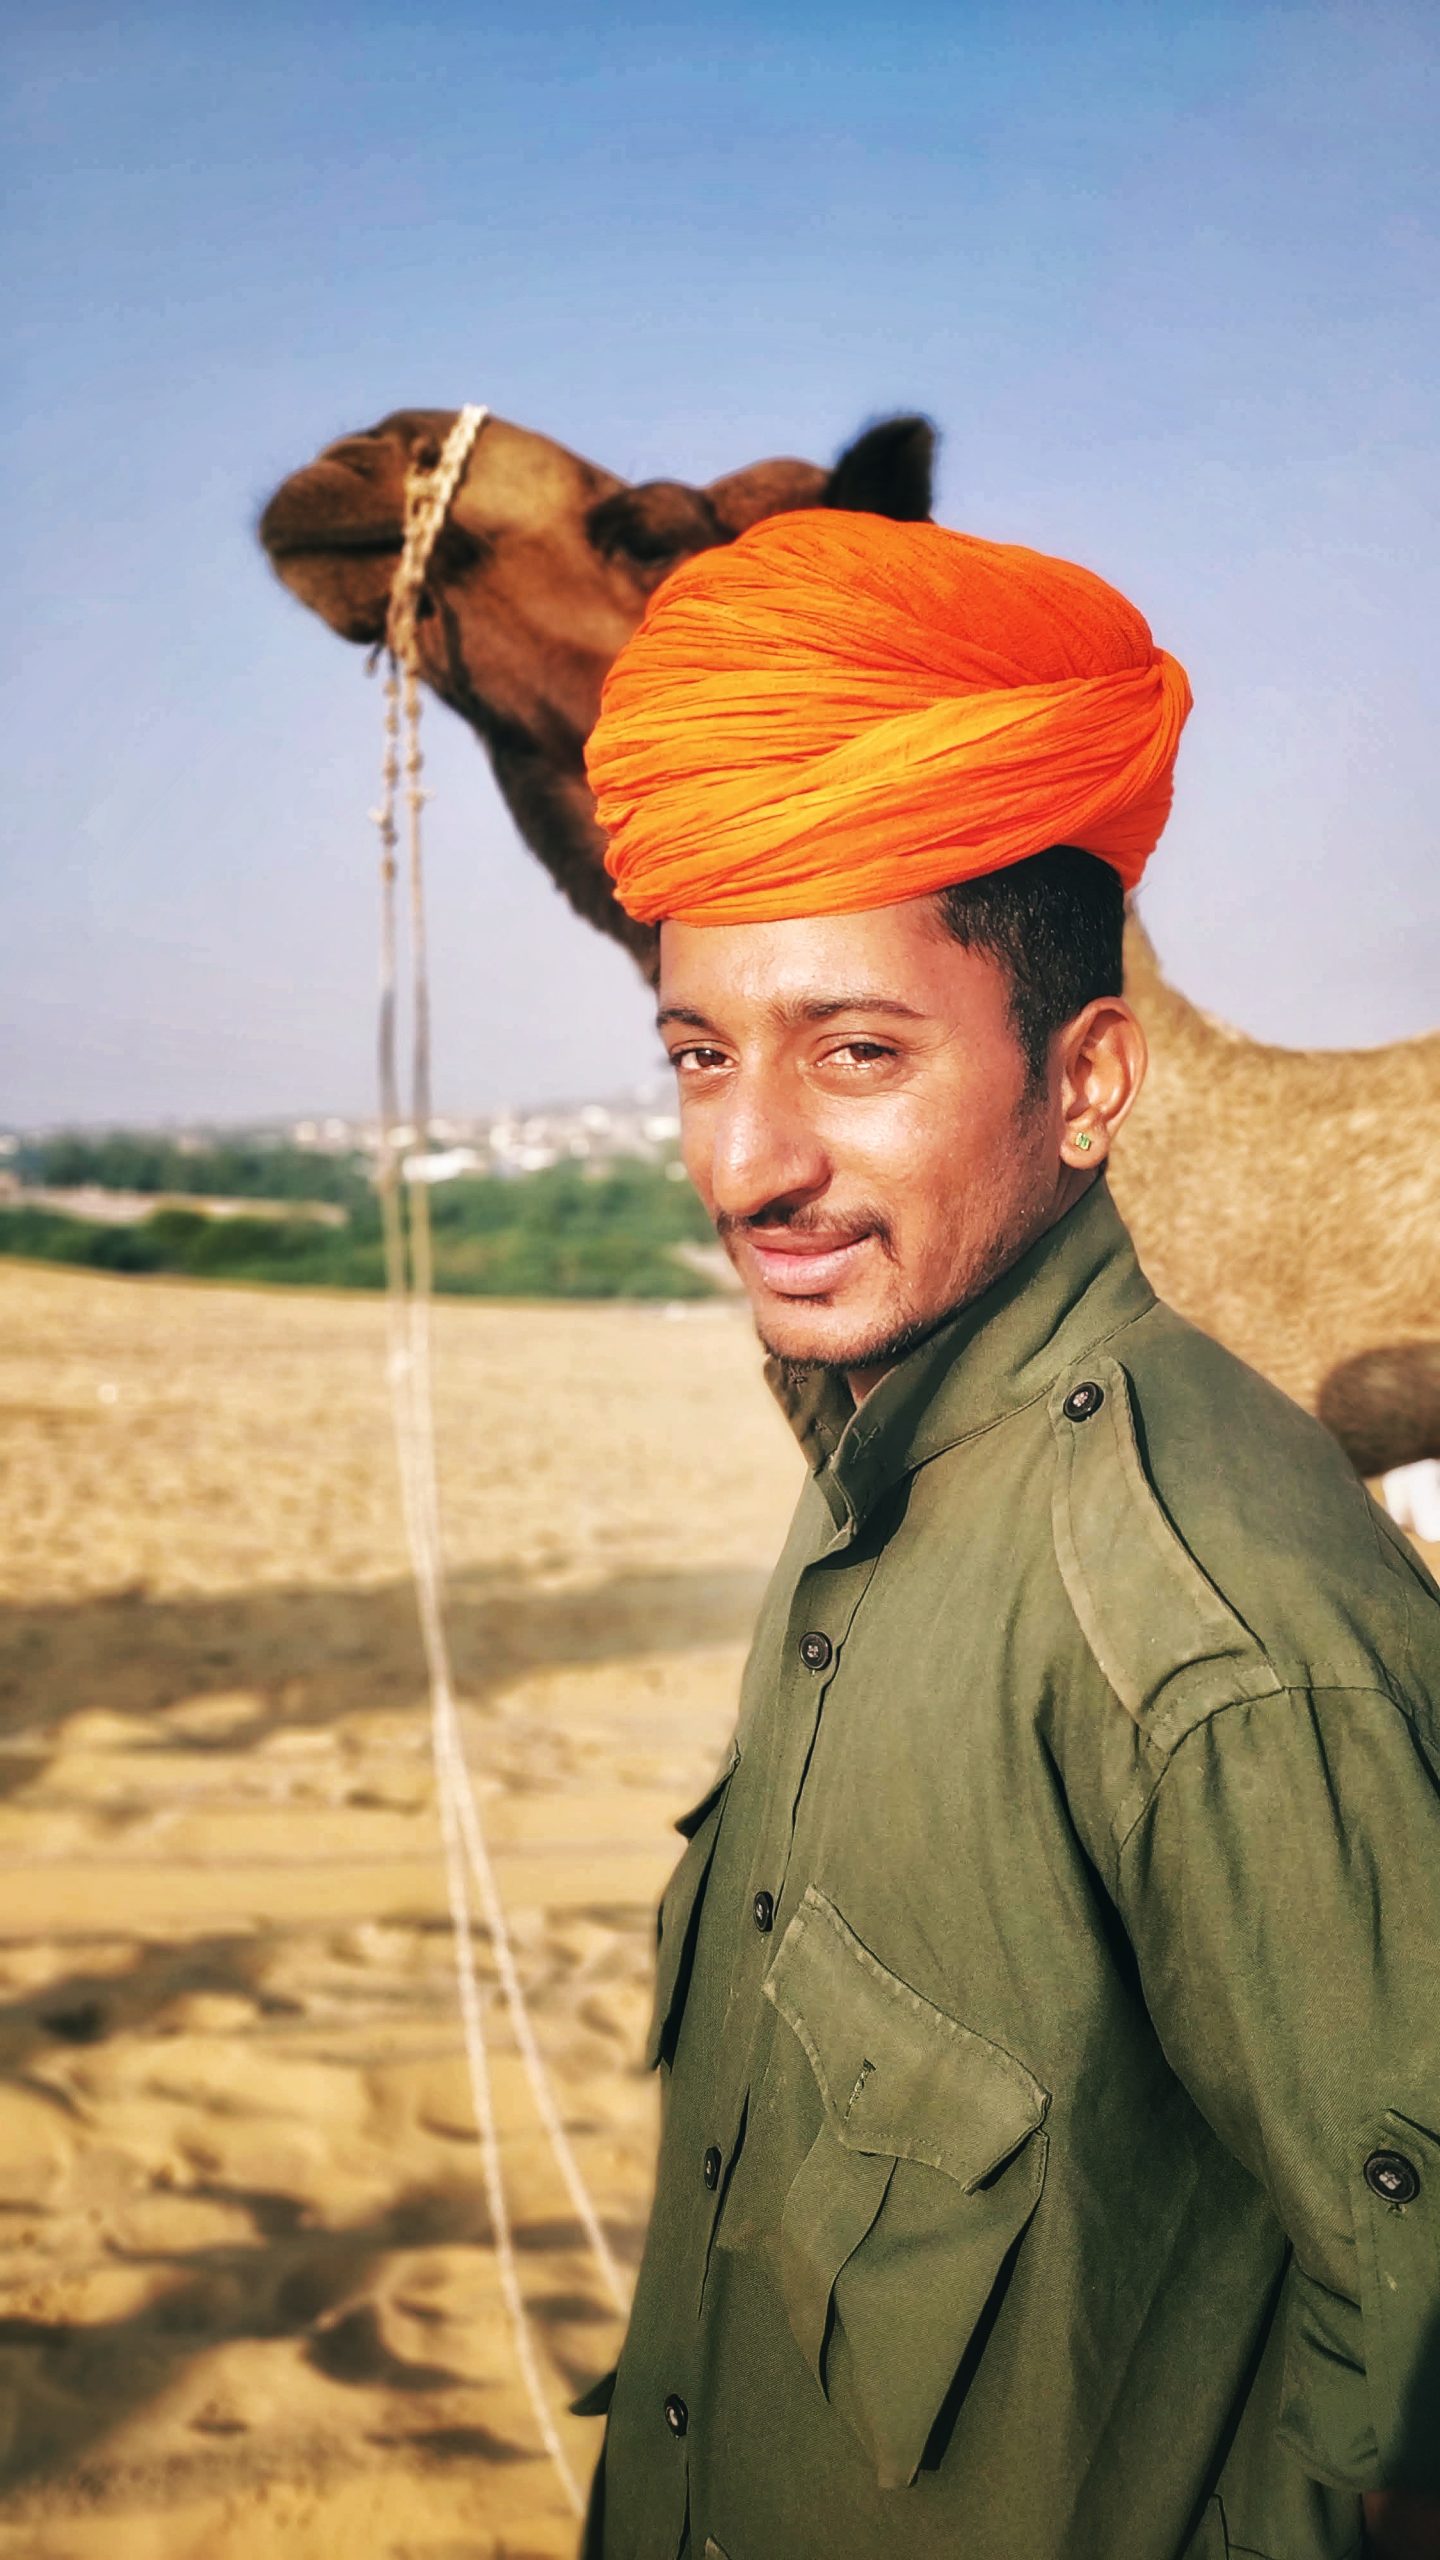 Man with camel